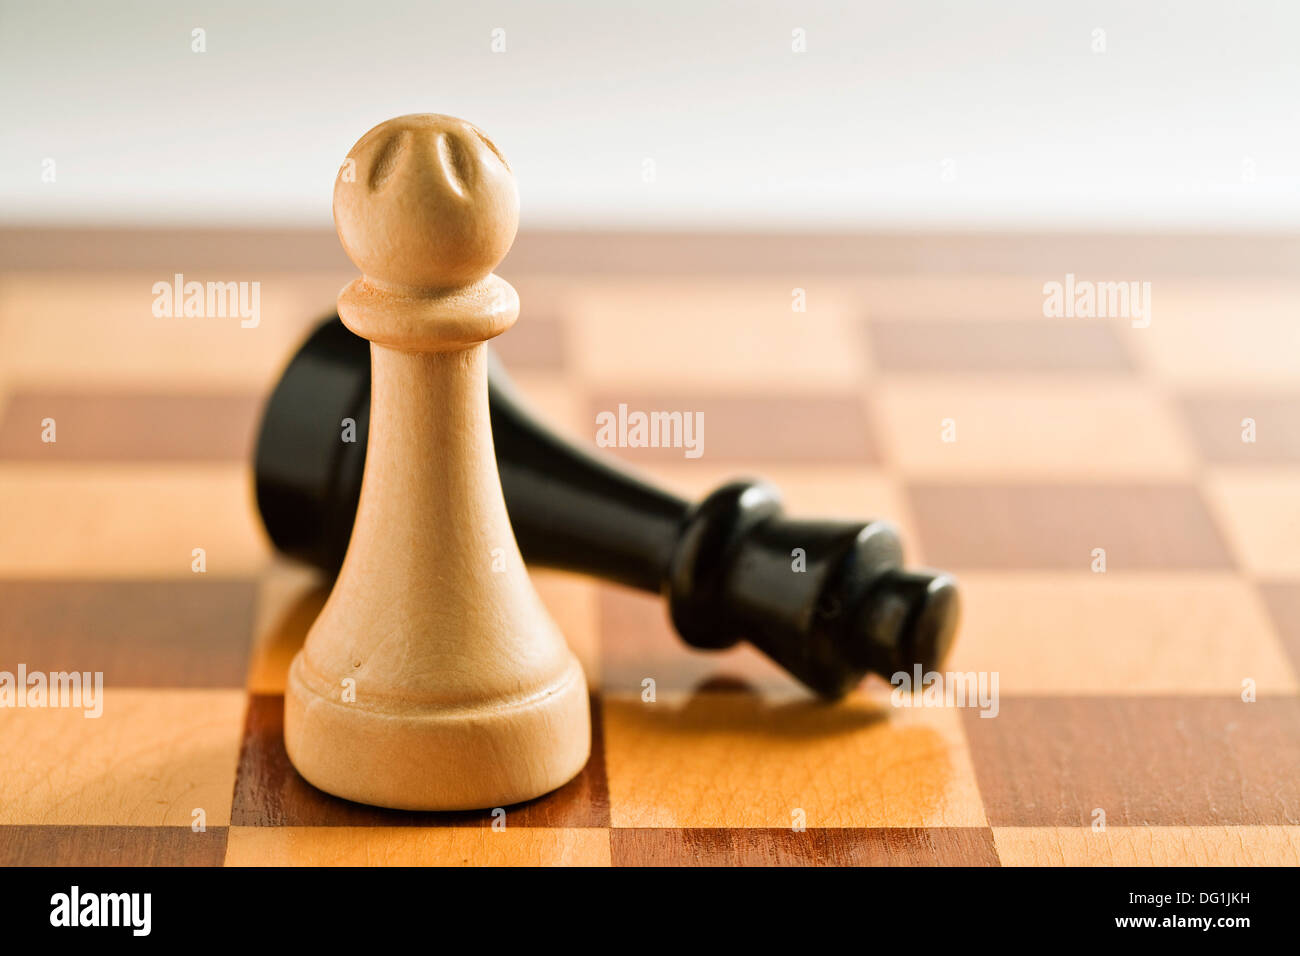 Checkmate Black Queen Takes Out White King To Win Match Stock Photo -  Download Image Now - iStock